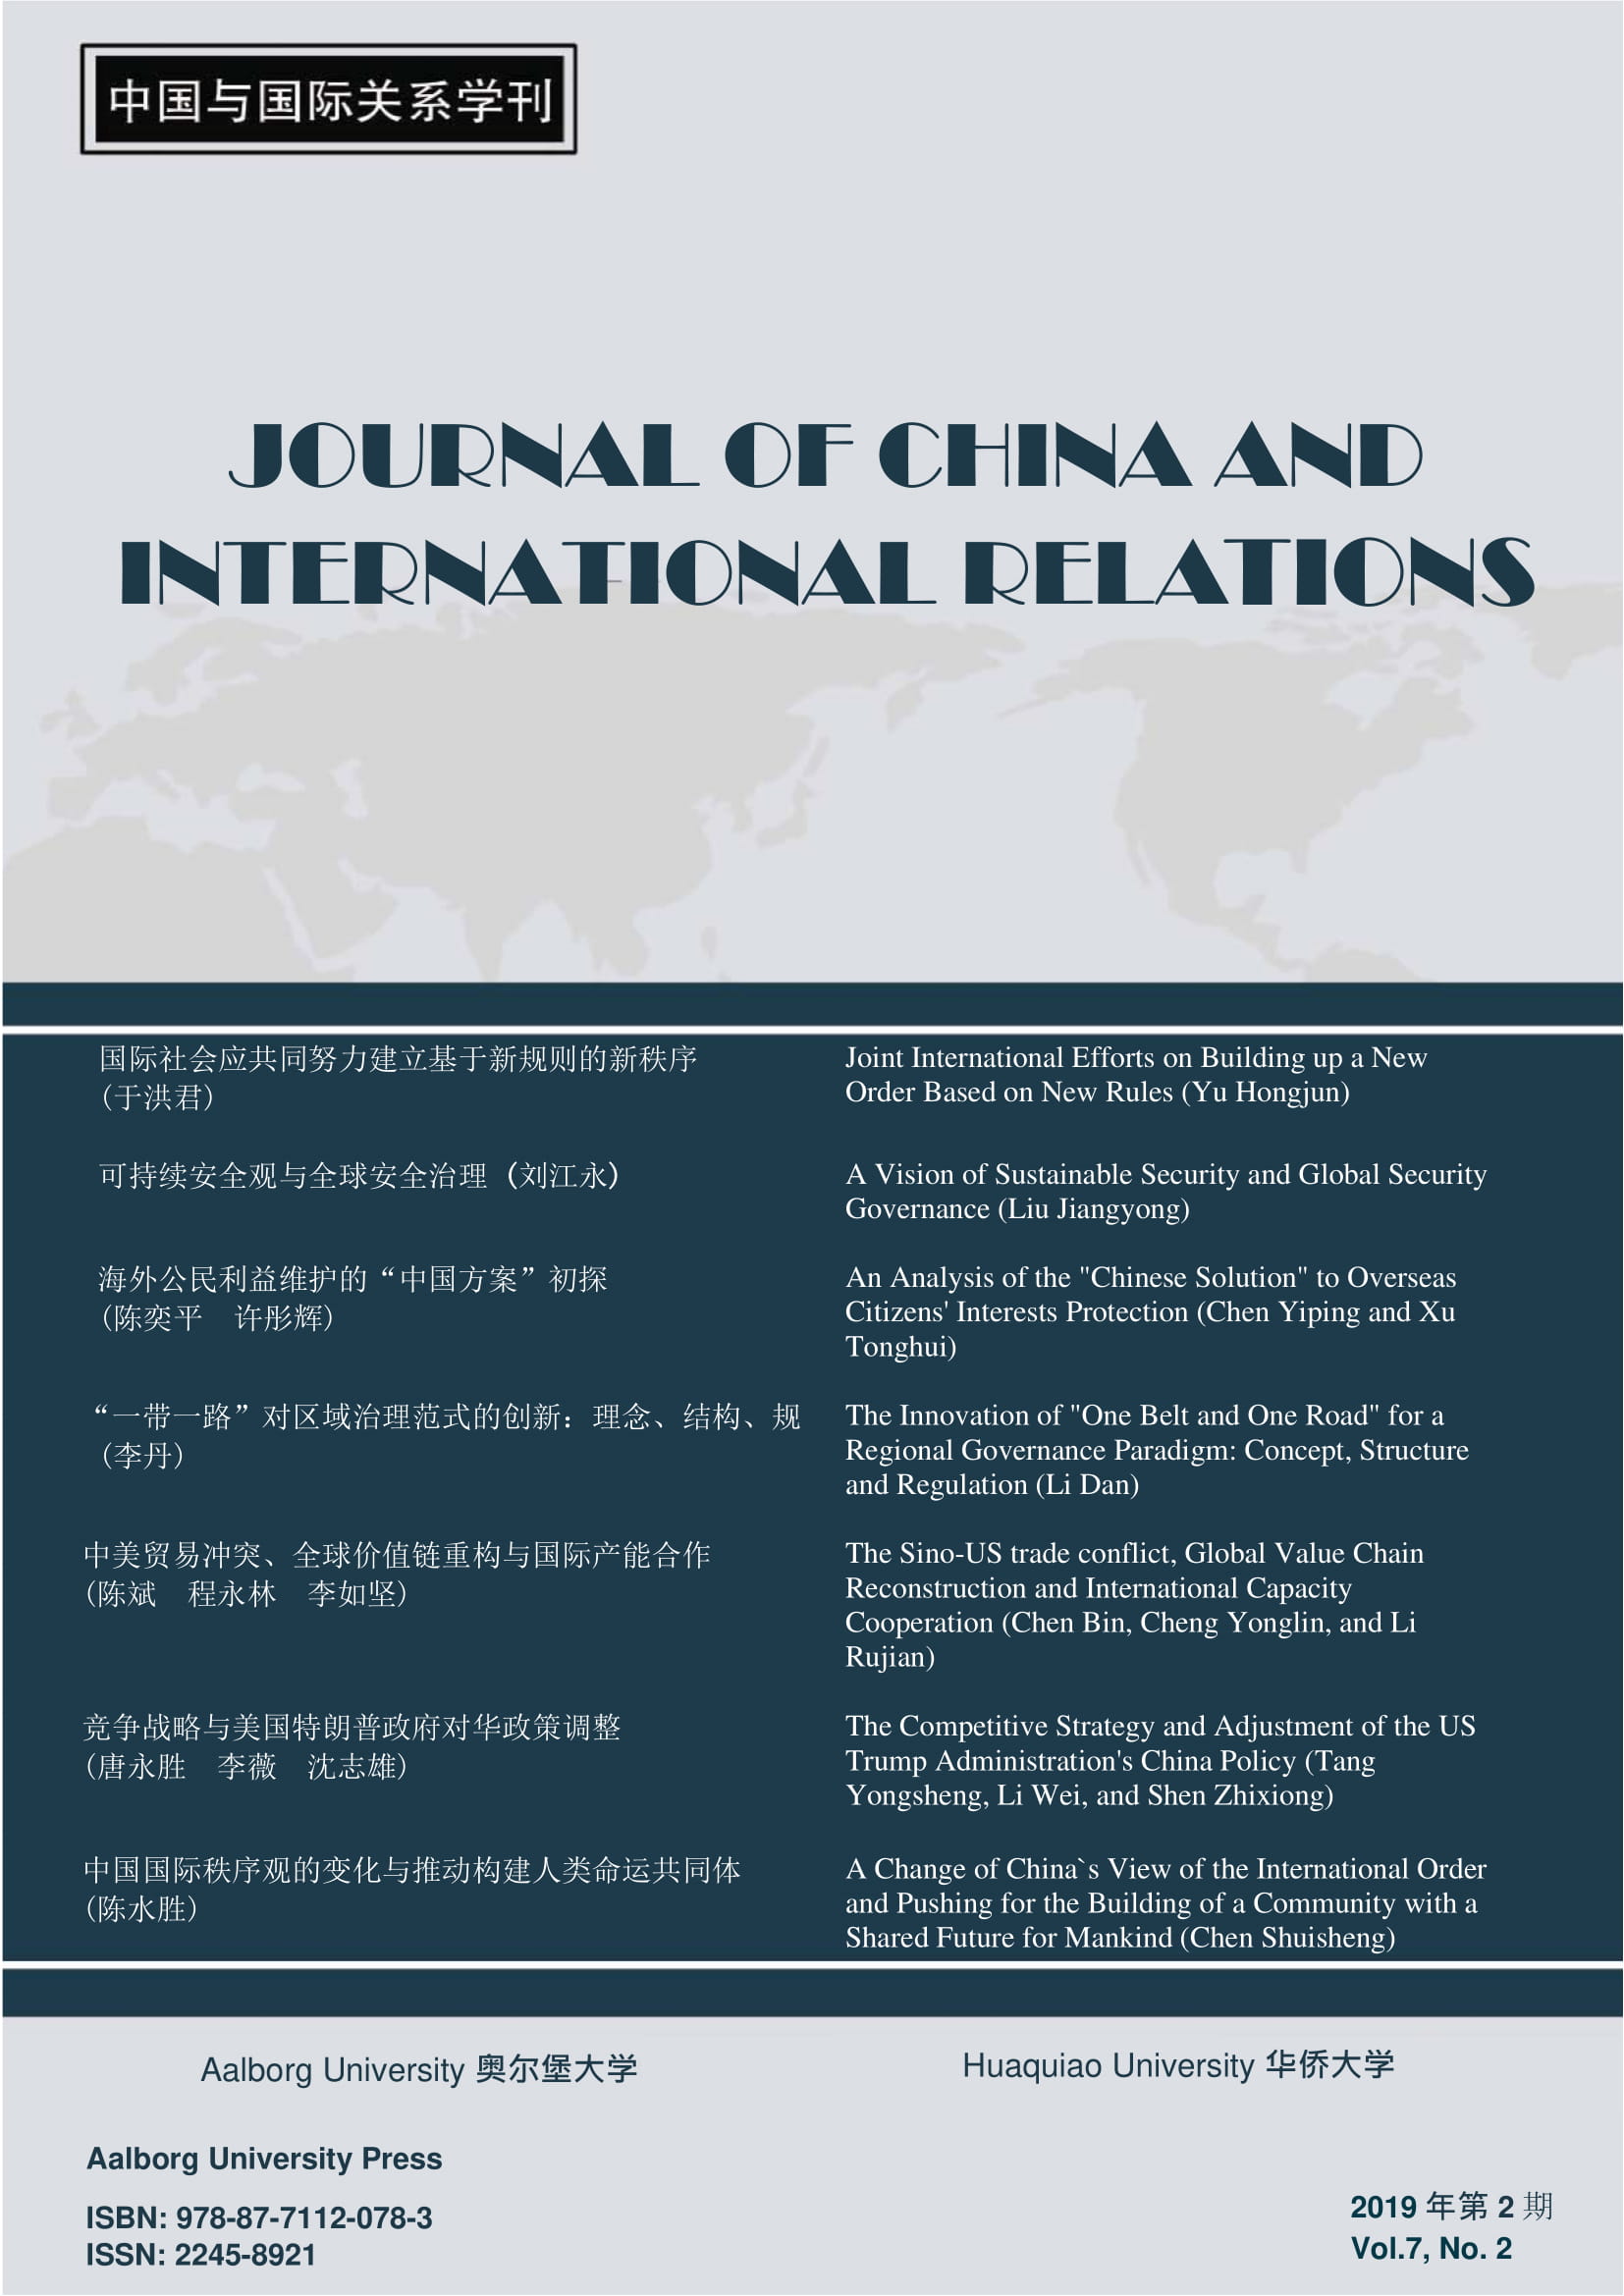 					View Vol. 7 No. 2 (2019): Journal of China and International Relations
				